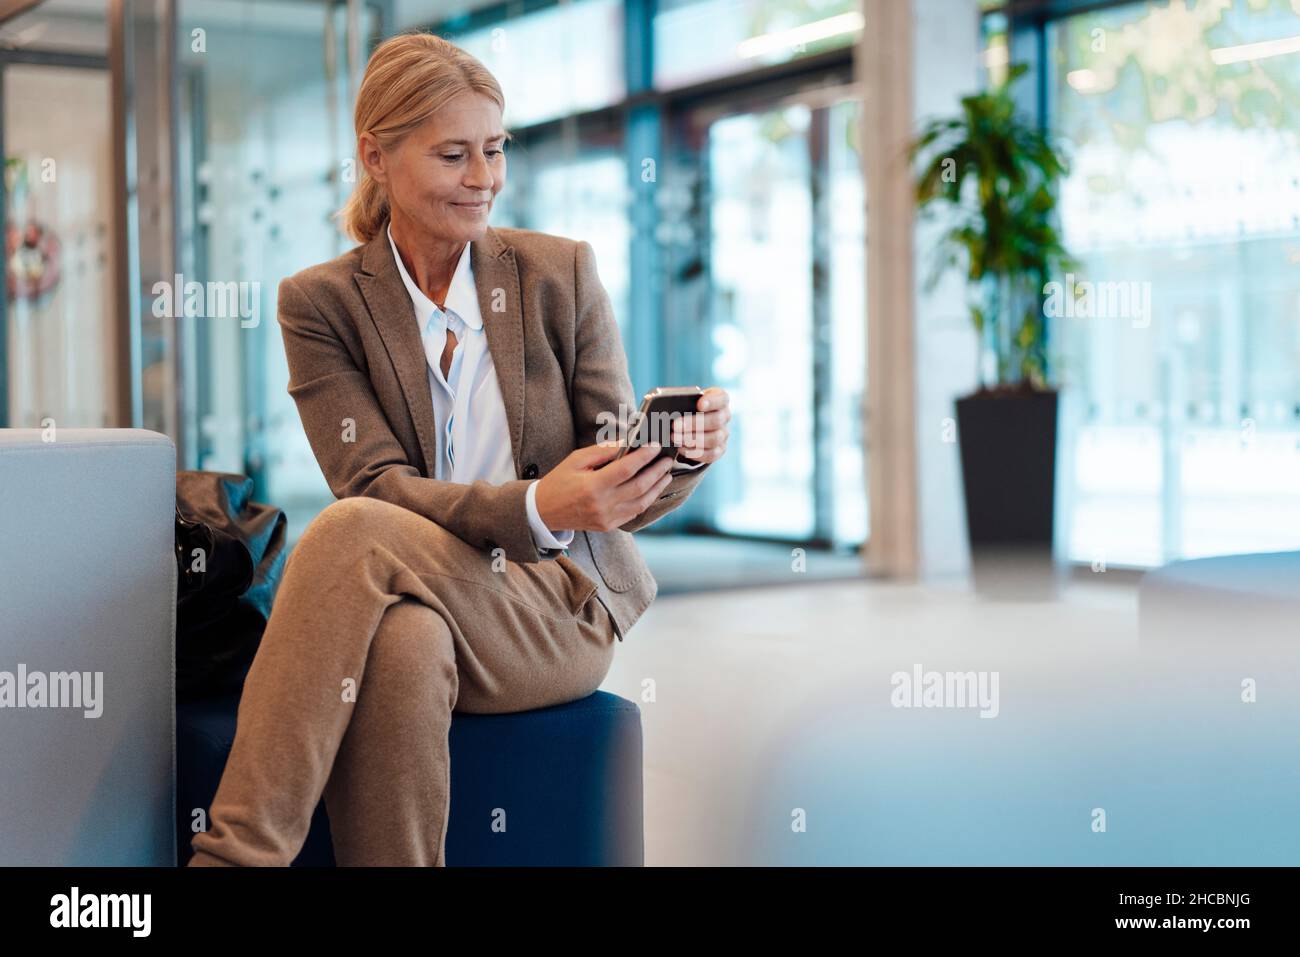 Thoughtful businesswoman sitting with legs crossed at knee in office Stock Photo